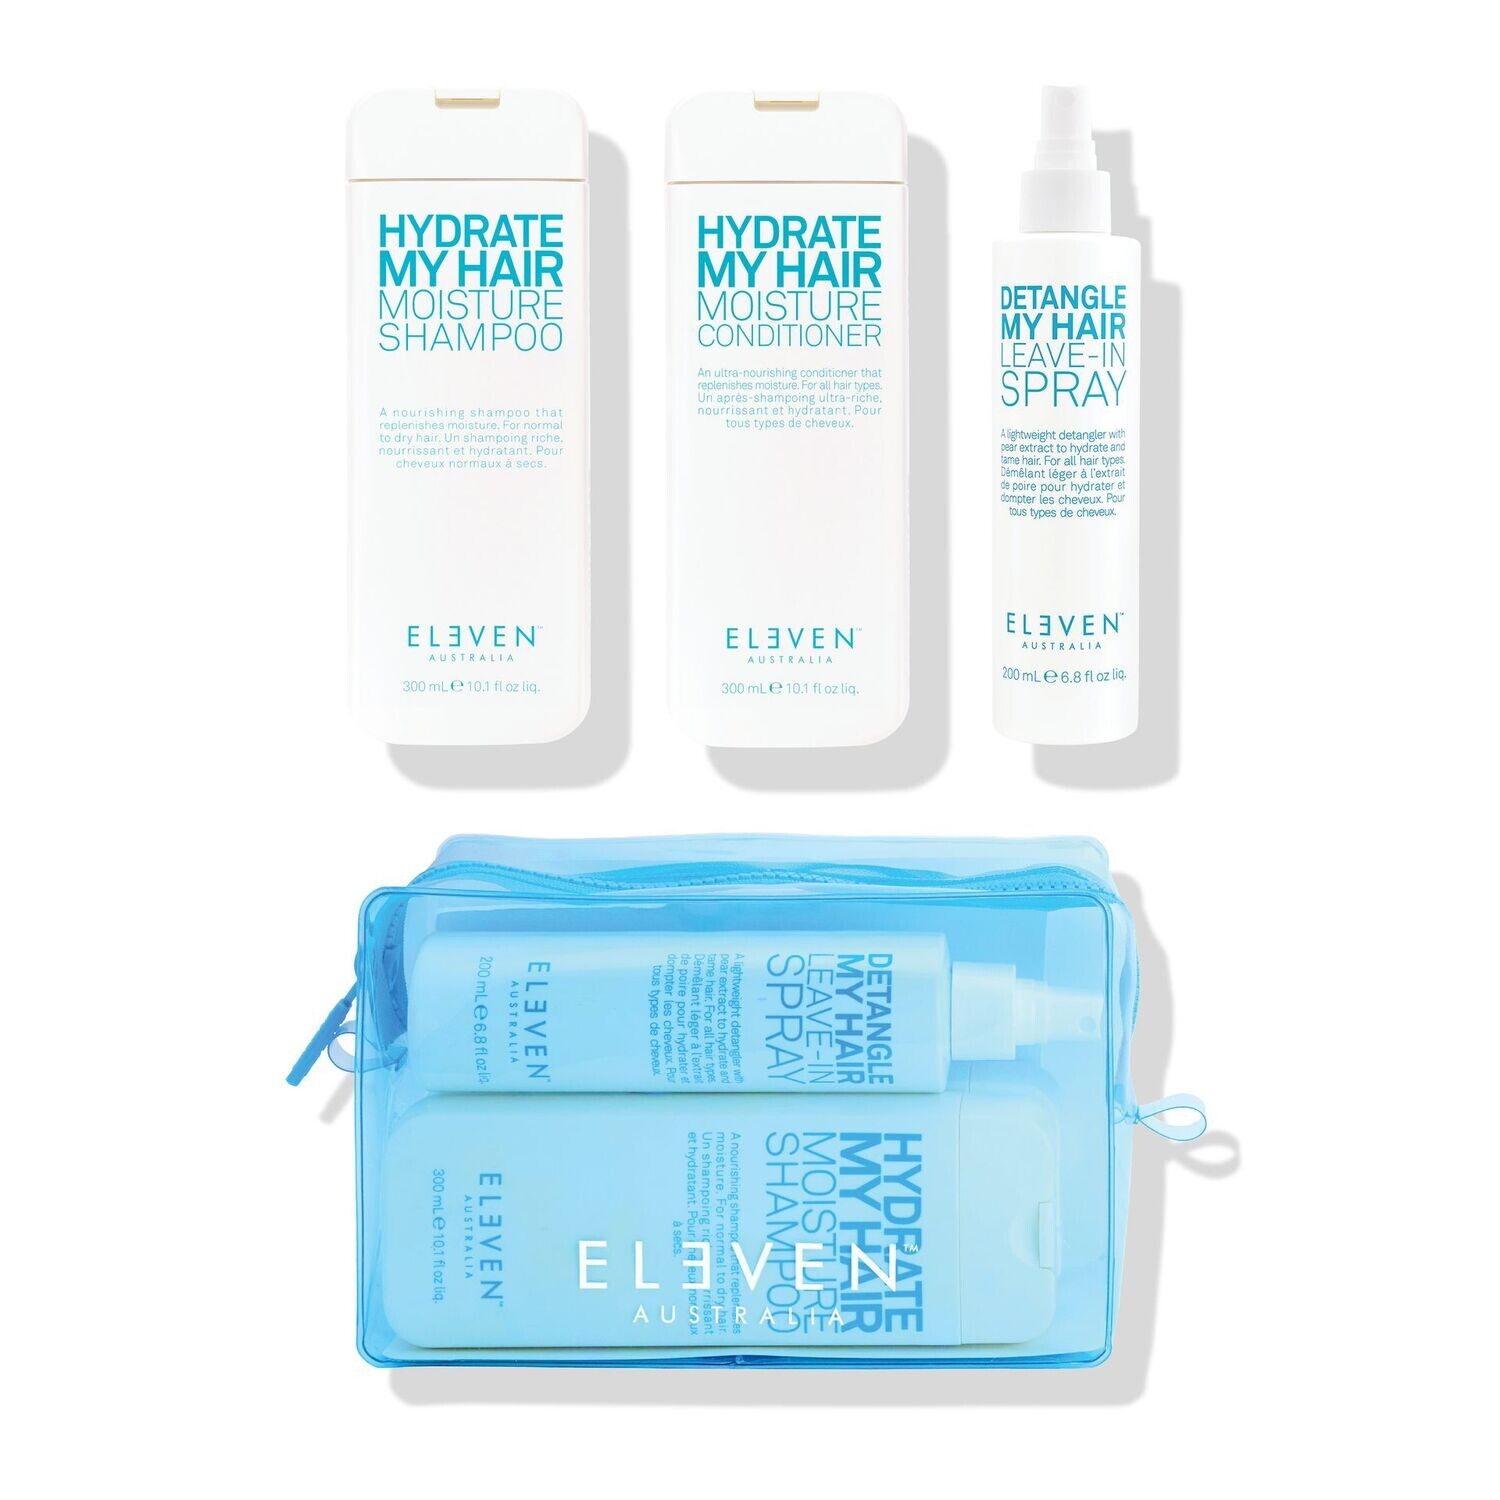 HYDRATE TRIO NEON HOLIDAY PACK